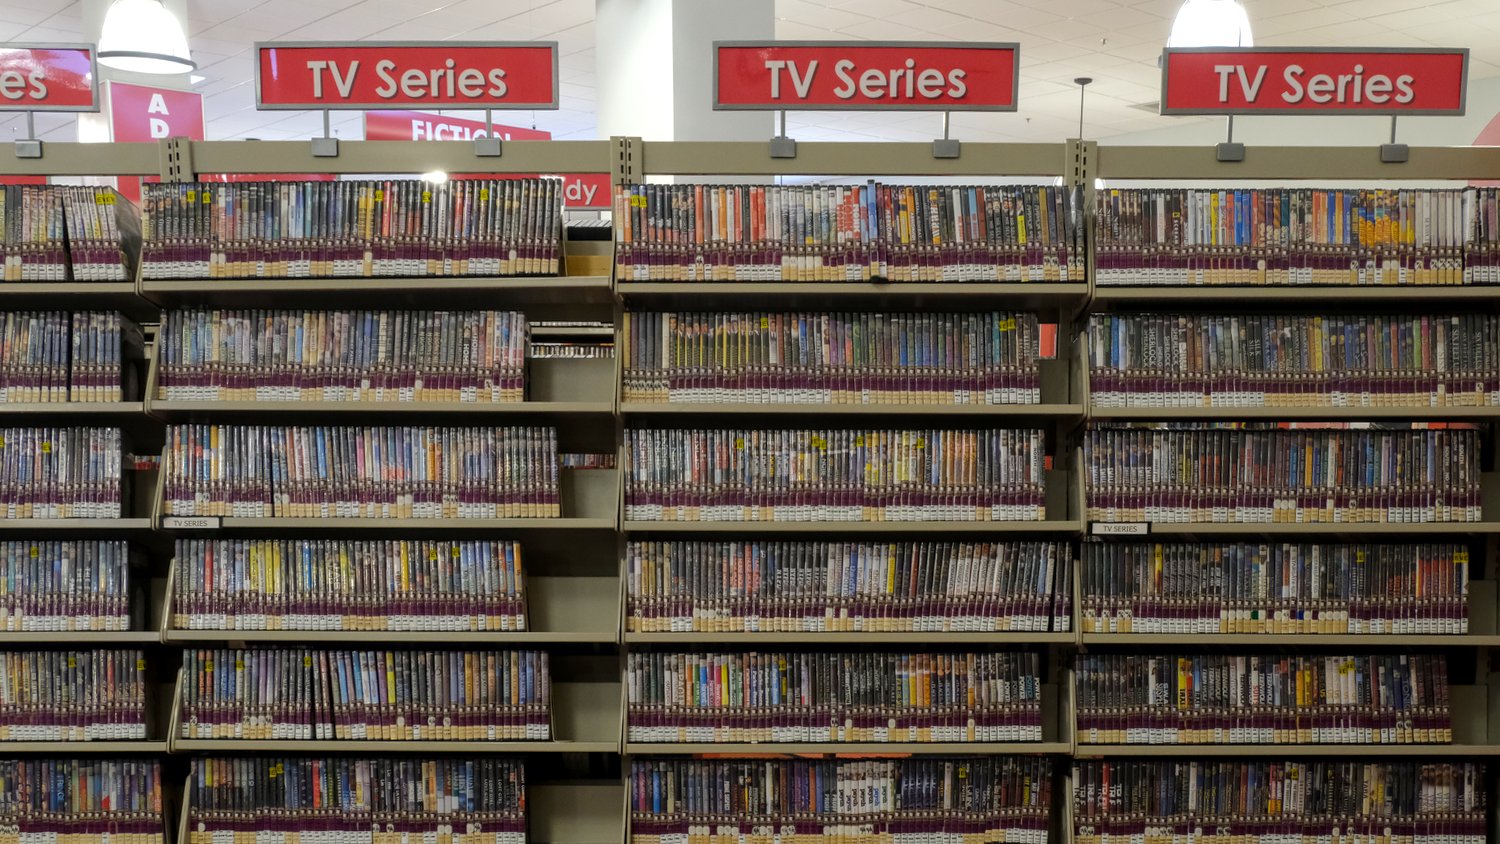 Separate TV series area for DVDs.